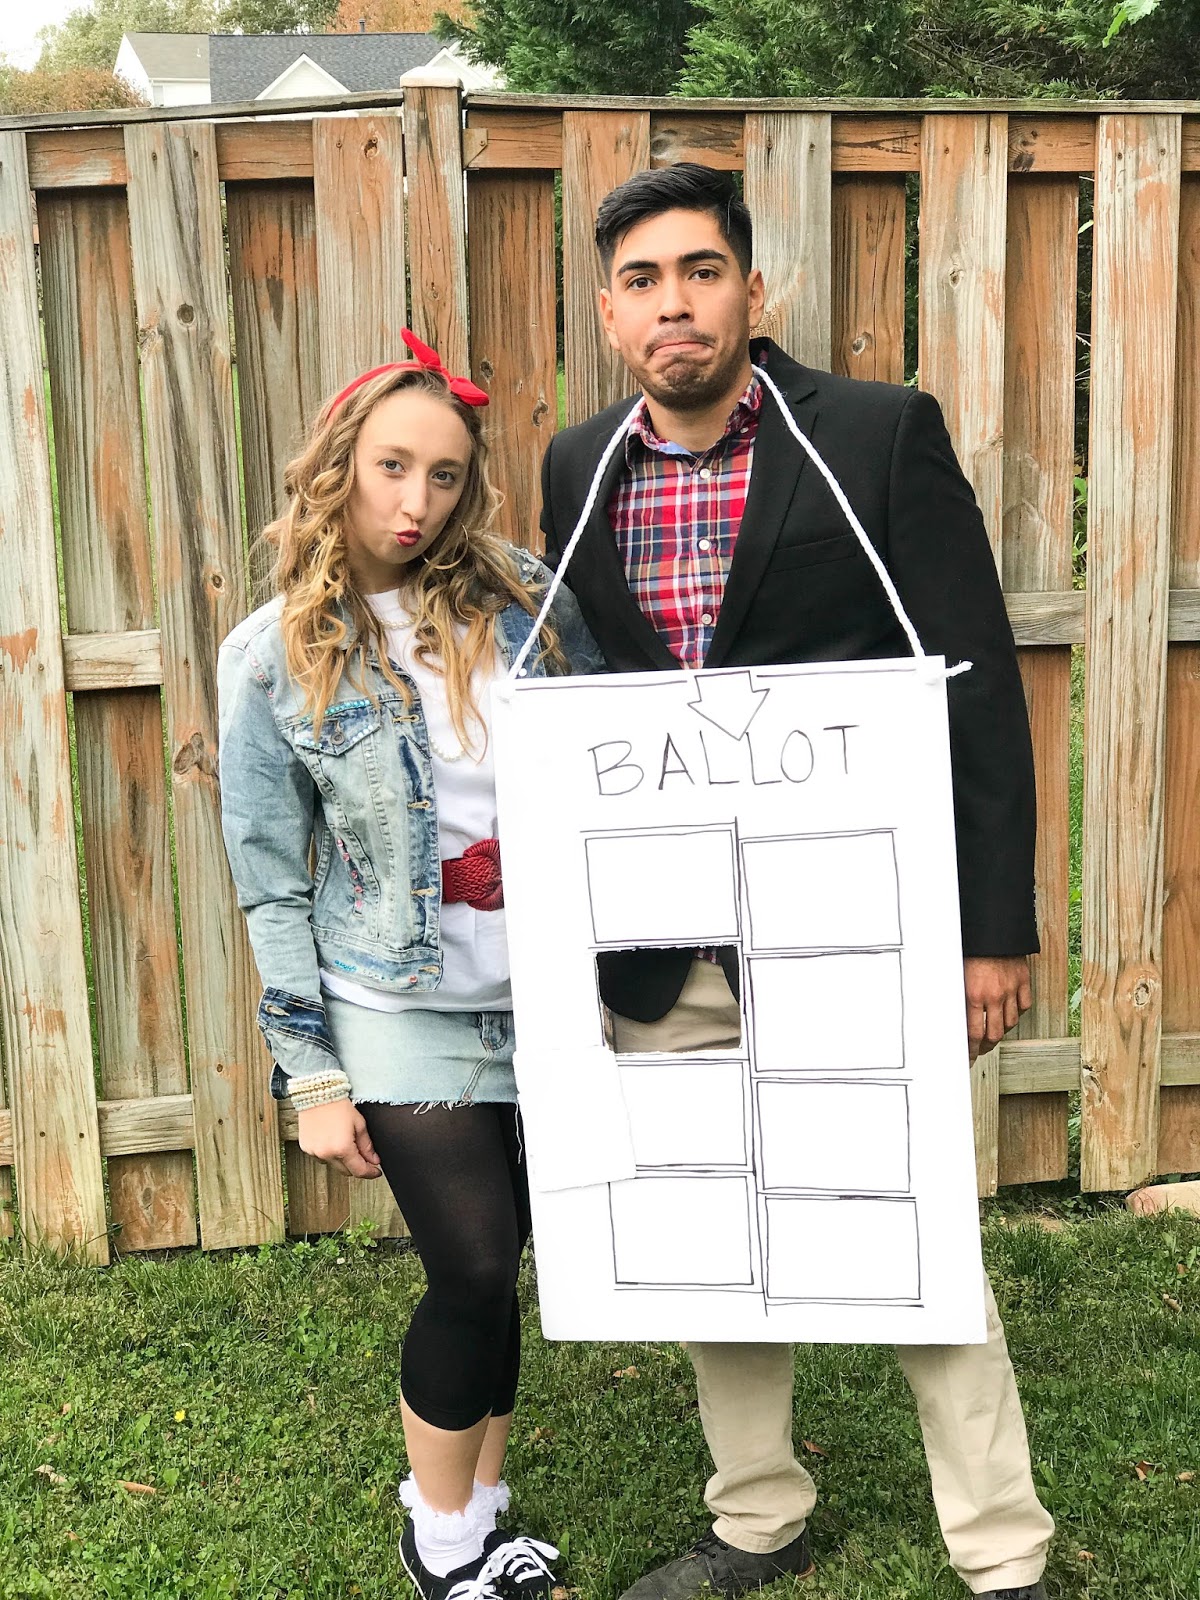 Our $50 Couples Costume